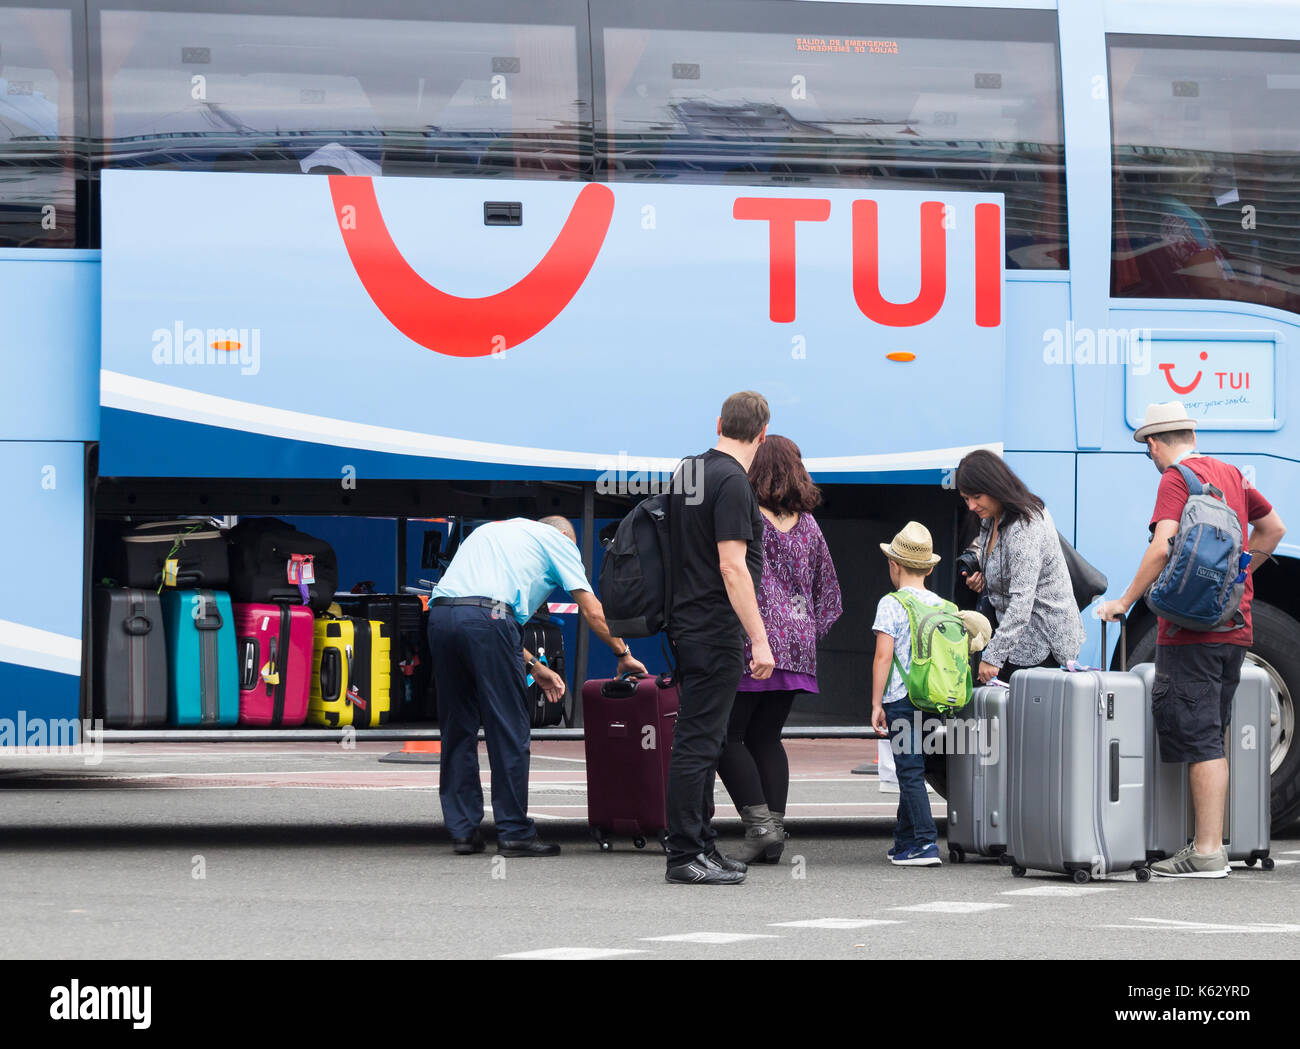 Tui coach driver loading luggage at airport in Spain Stock Photo